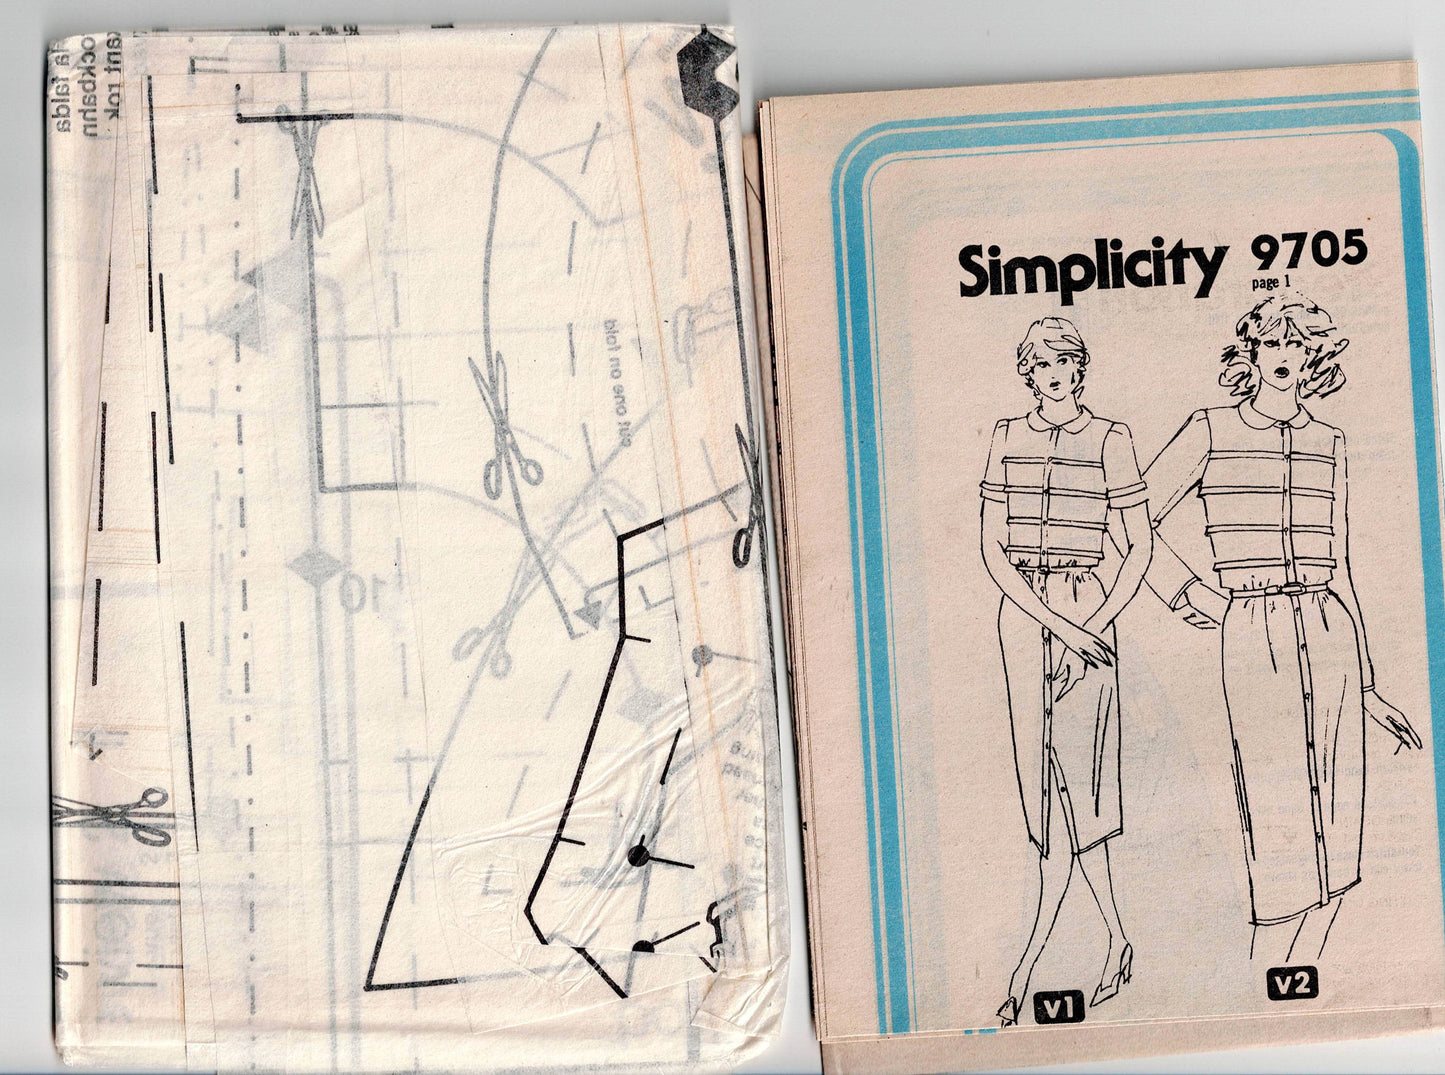 Simplicity 9705  Jonathan Hitchcock for Reuben Thomas Tucked Front Dress 1980s Vintage Sewing Pattern Size 12 Bust 34 inches UNCUT Factory Folded